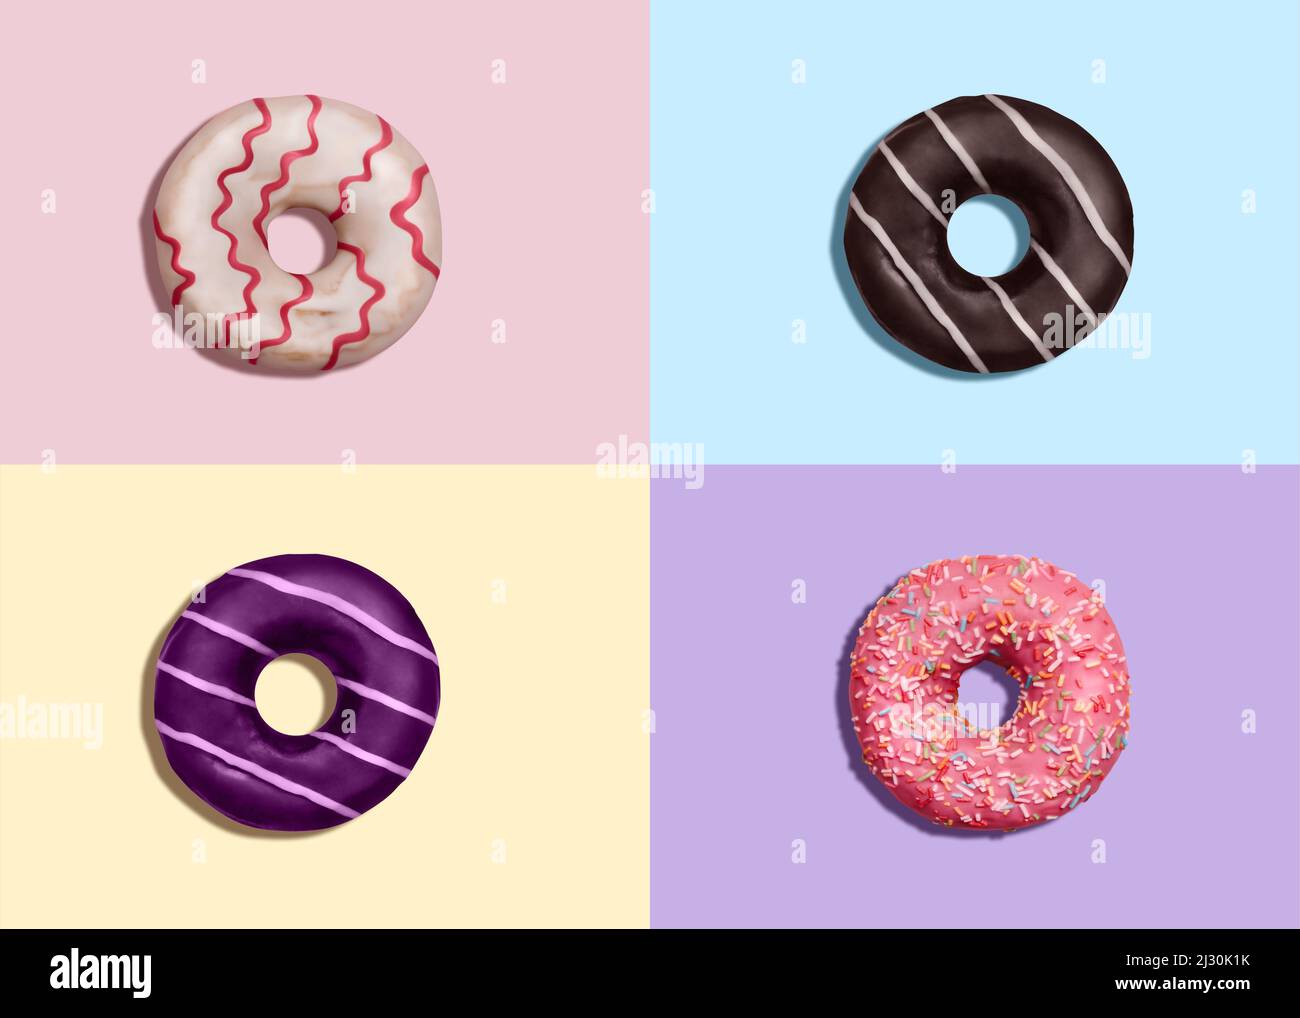 Various glazed doughnuts with sprinkles on colorful background Stock Photo